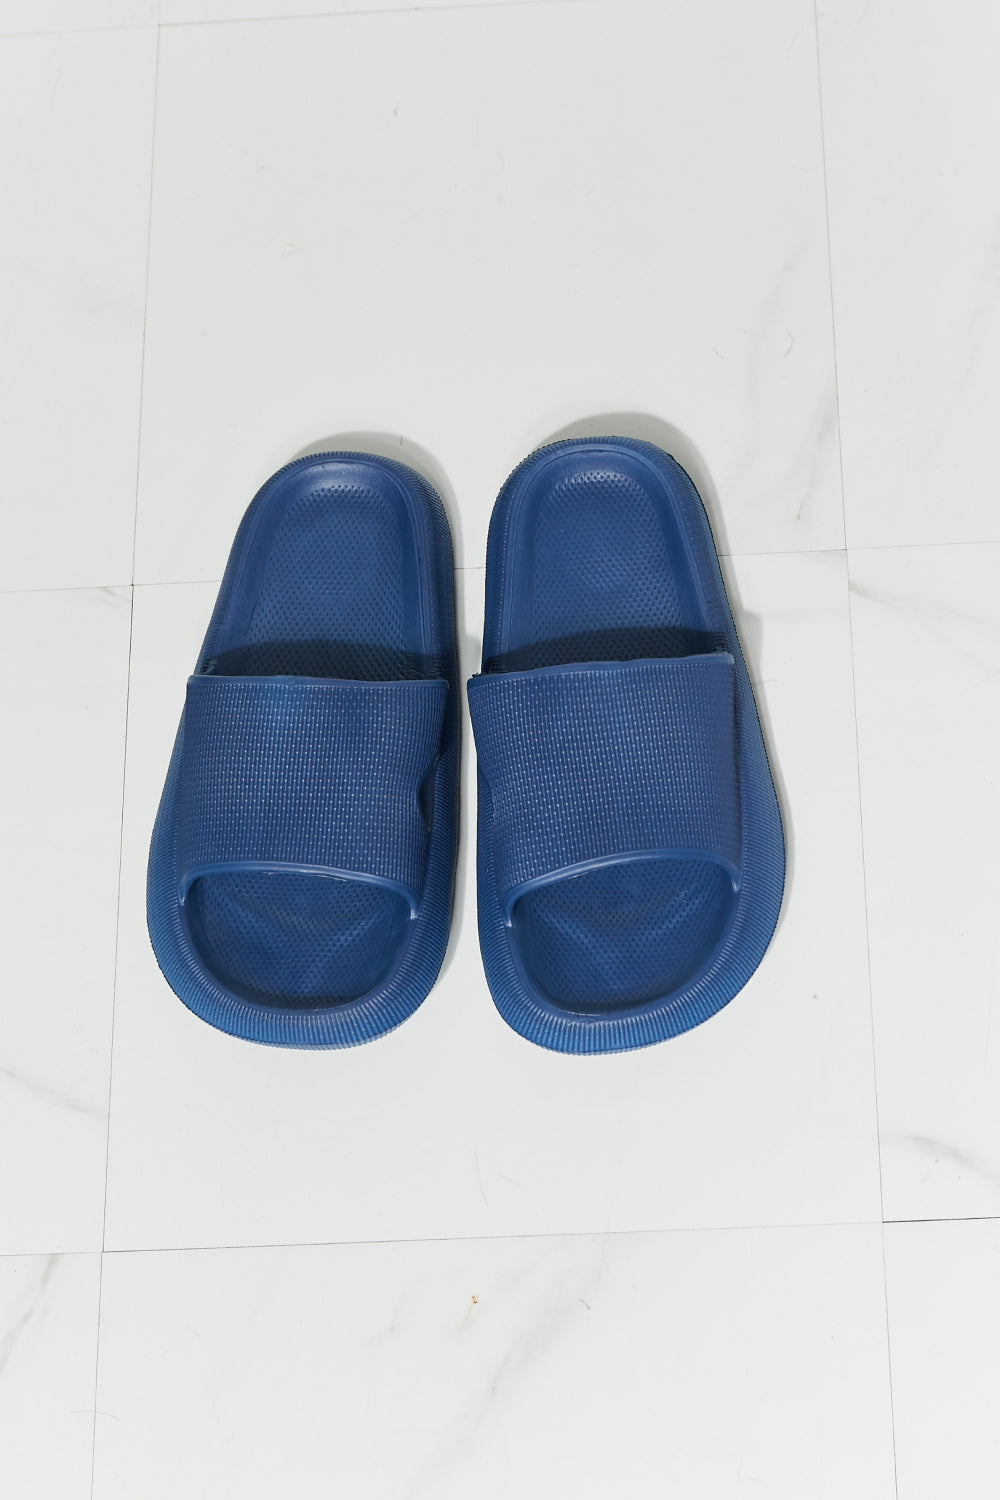 MMShoes Arms Around Me Open Toe Slide in Navy - nailedmoms